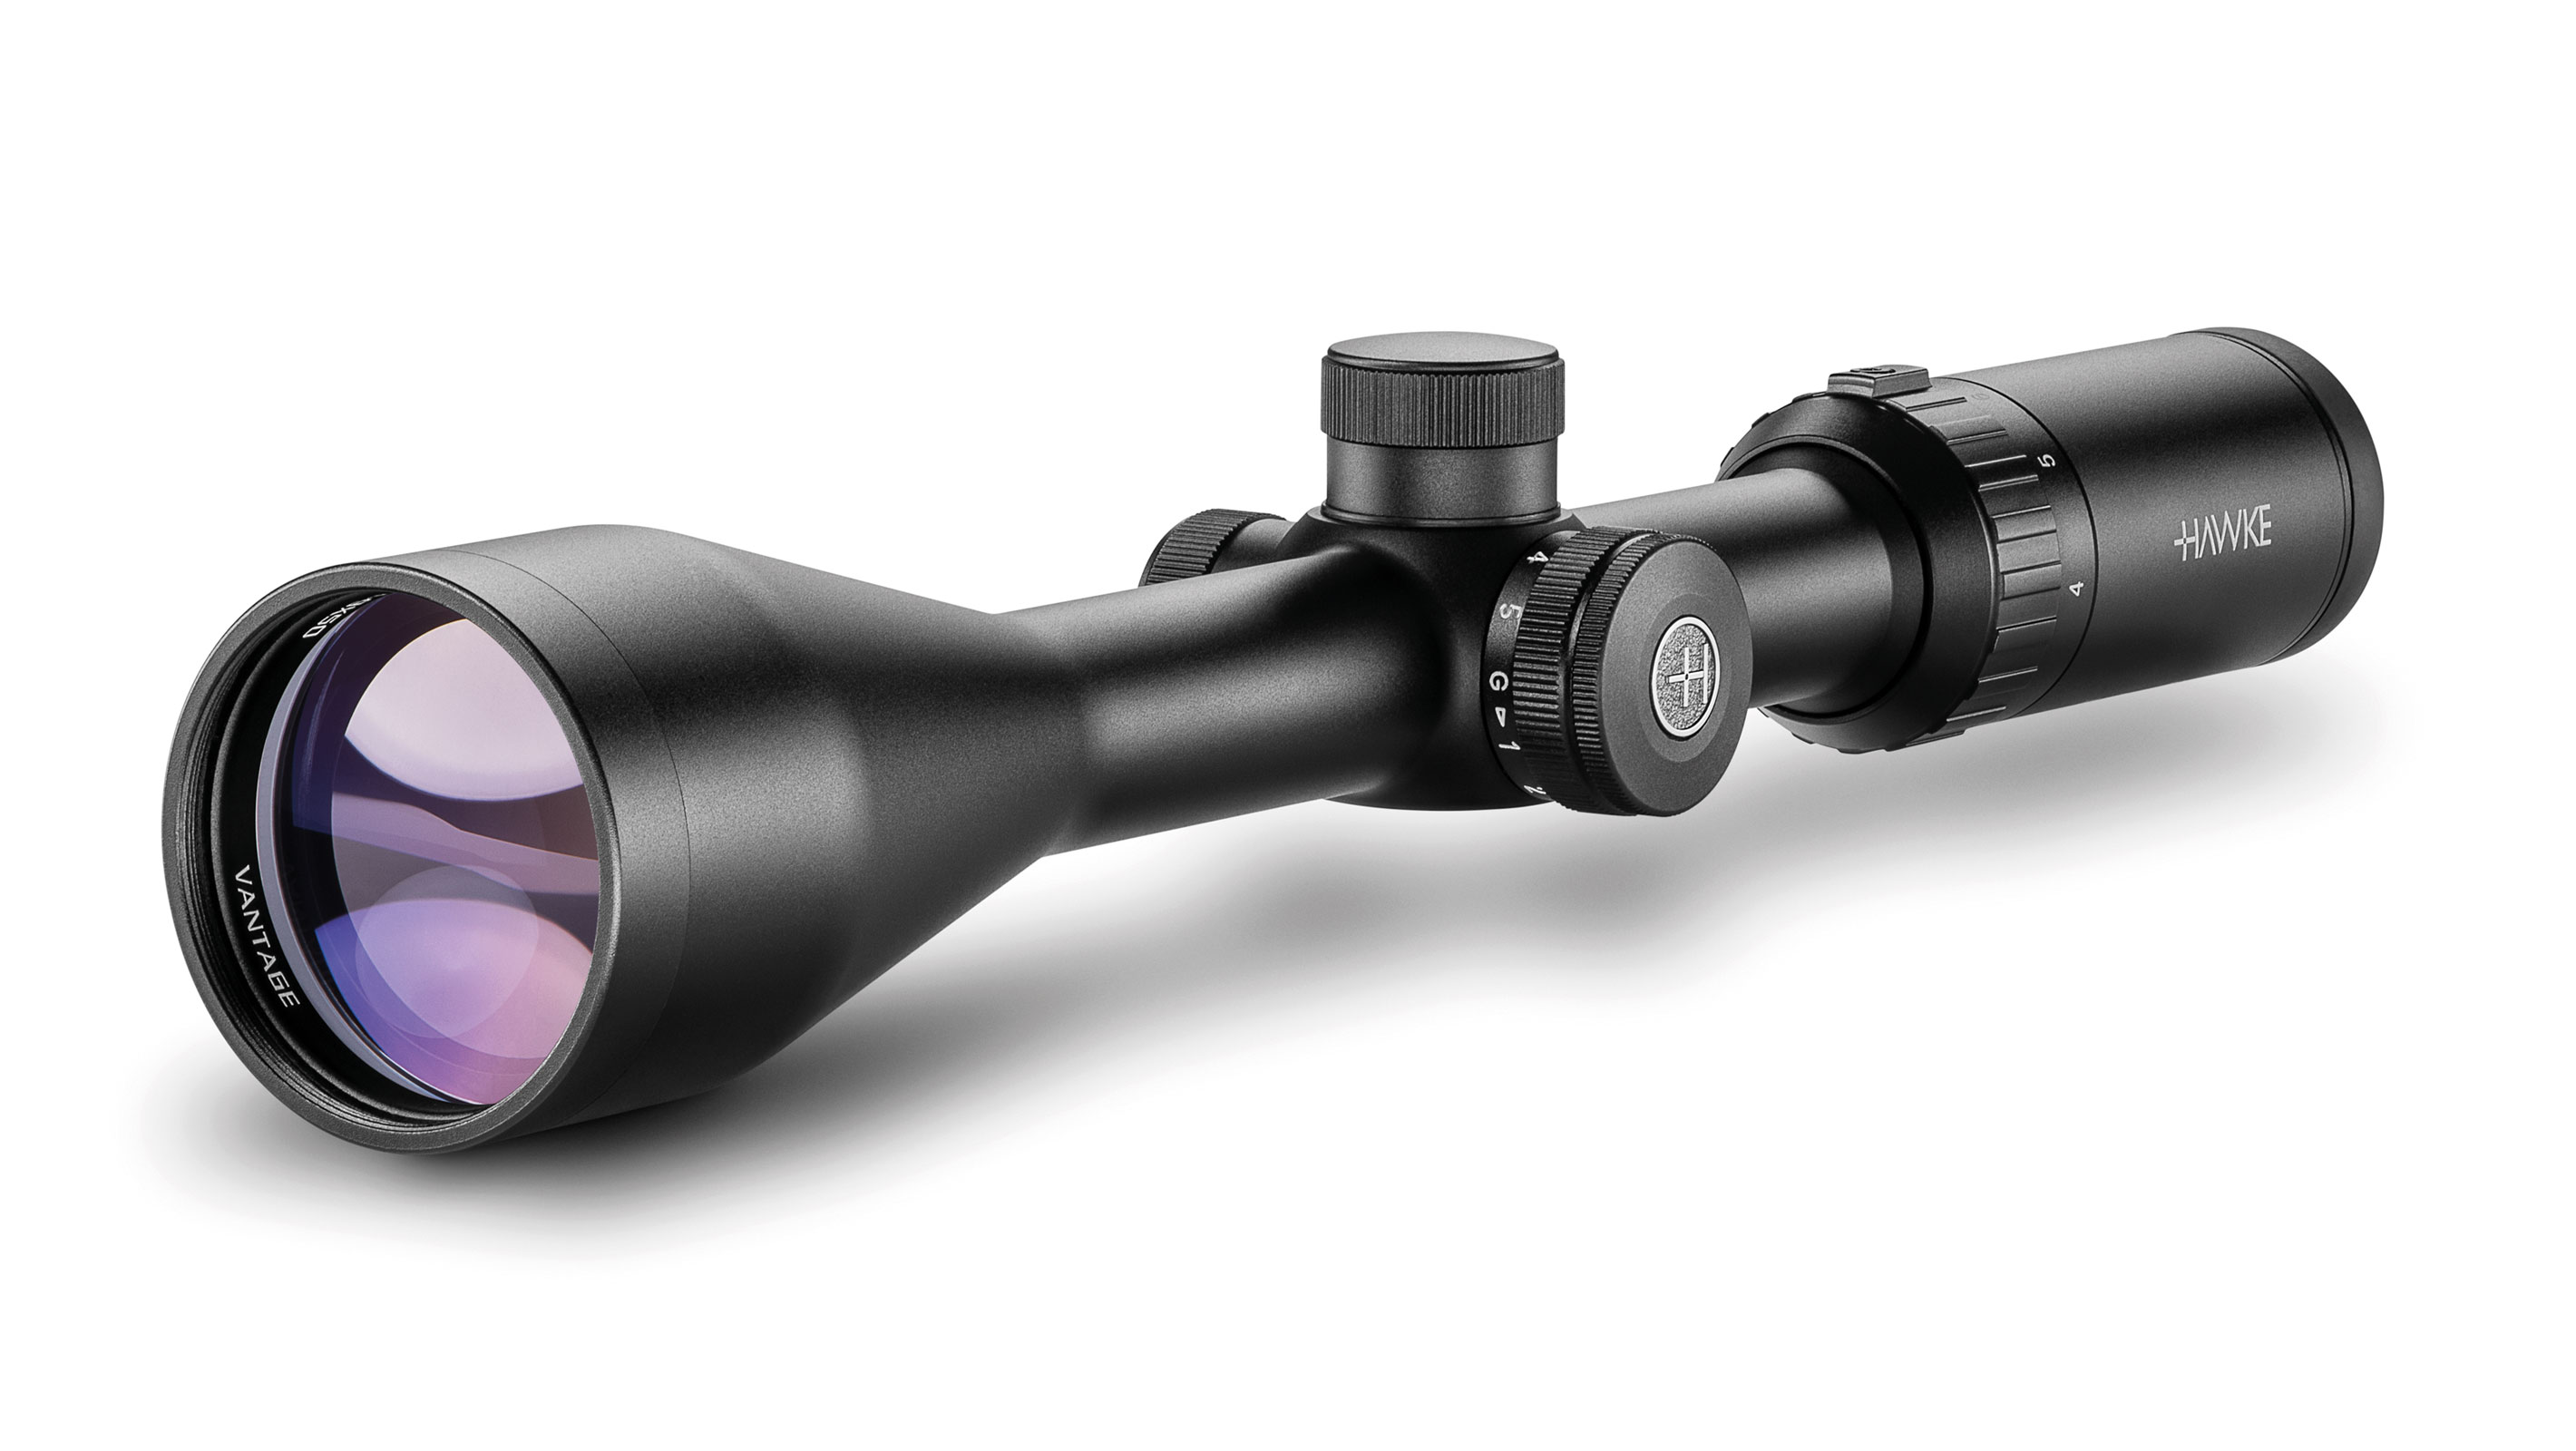 Objective End View Of The Hawke Vantage IR 3-9x50 L4A Dot Rifle Scope